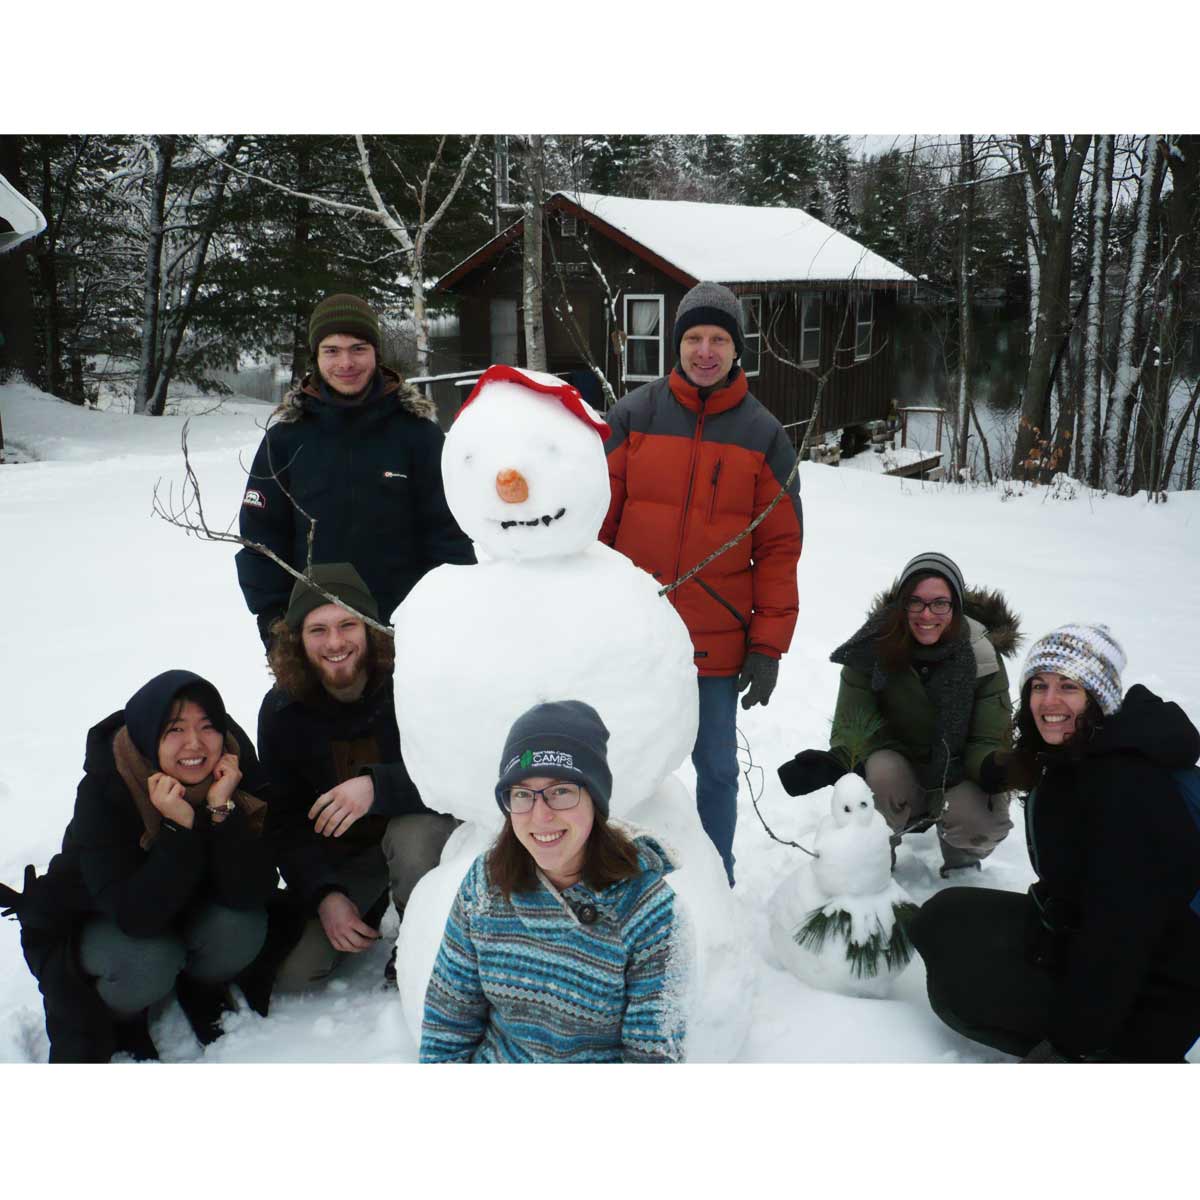 guests and staff built a snowman